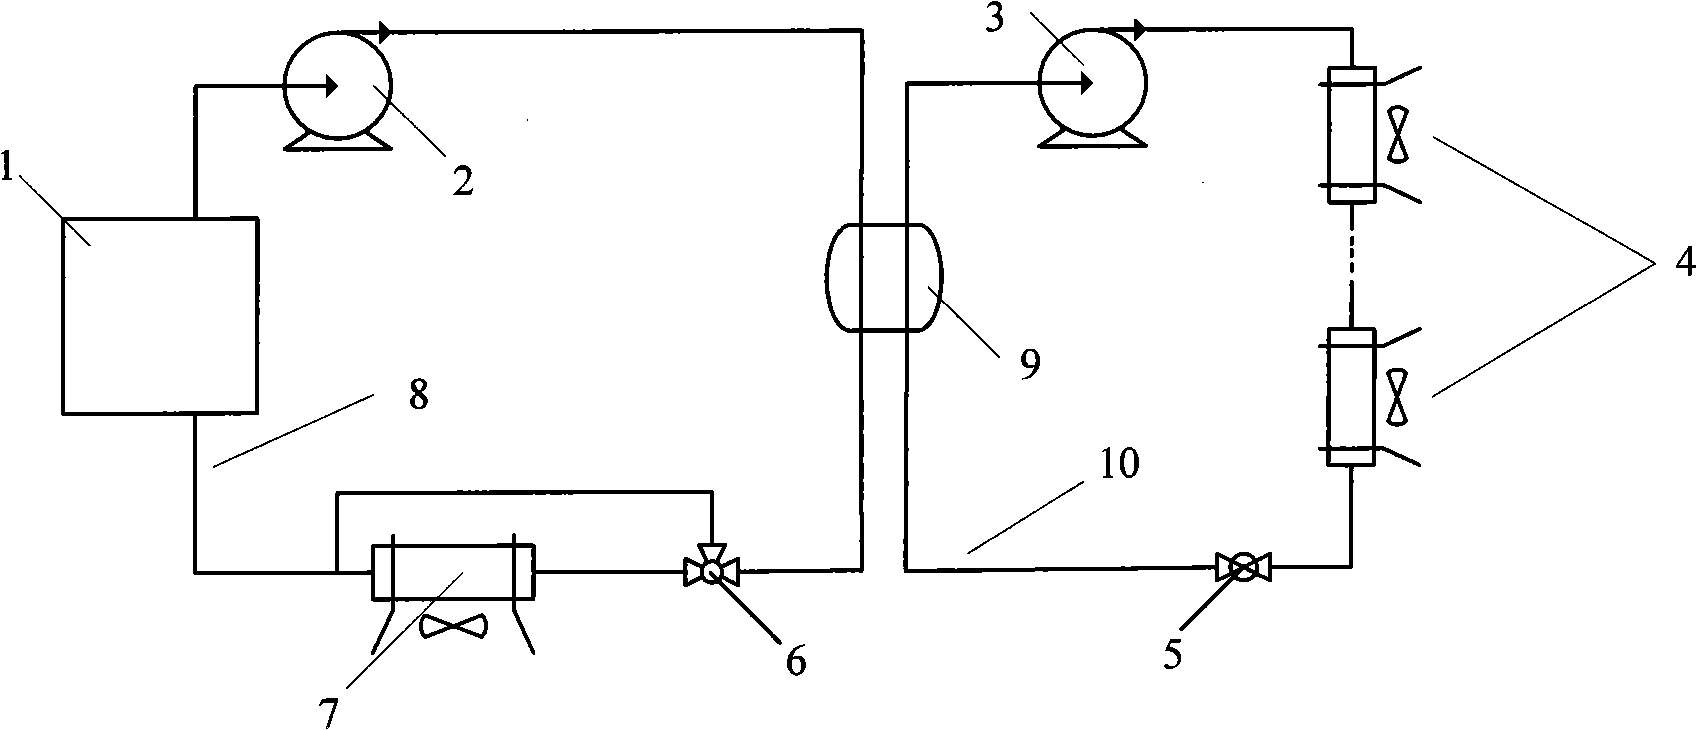 Exhaust heat heating system of fuel cell vehicle